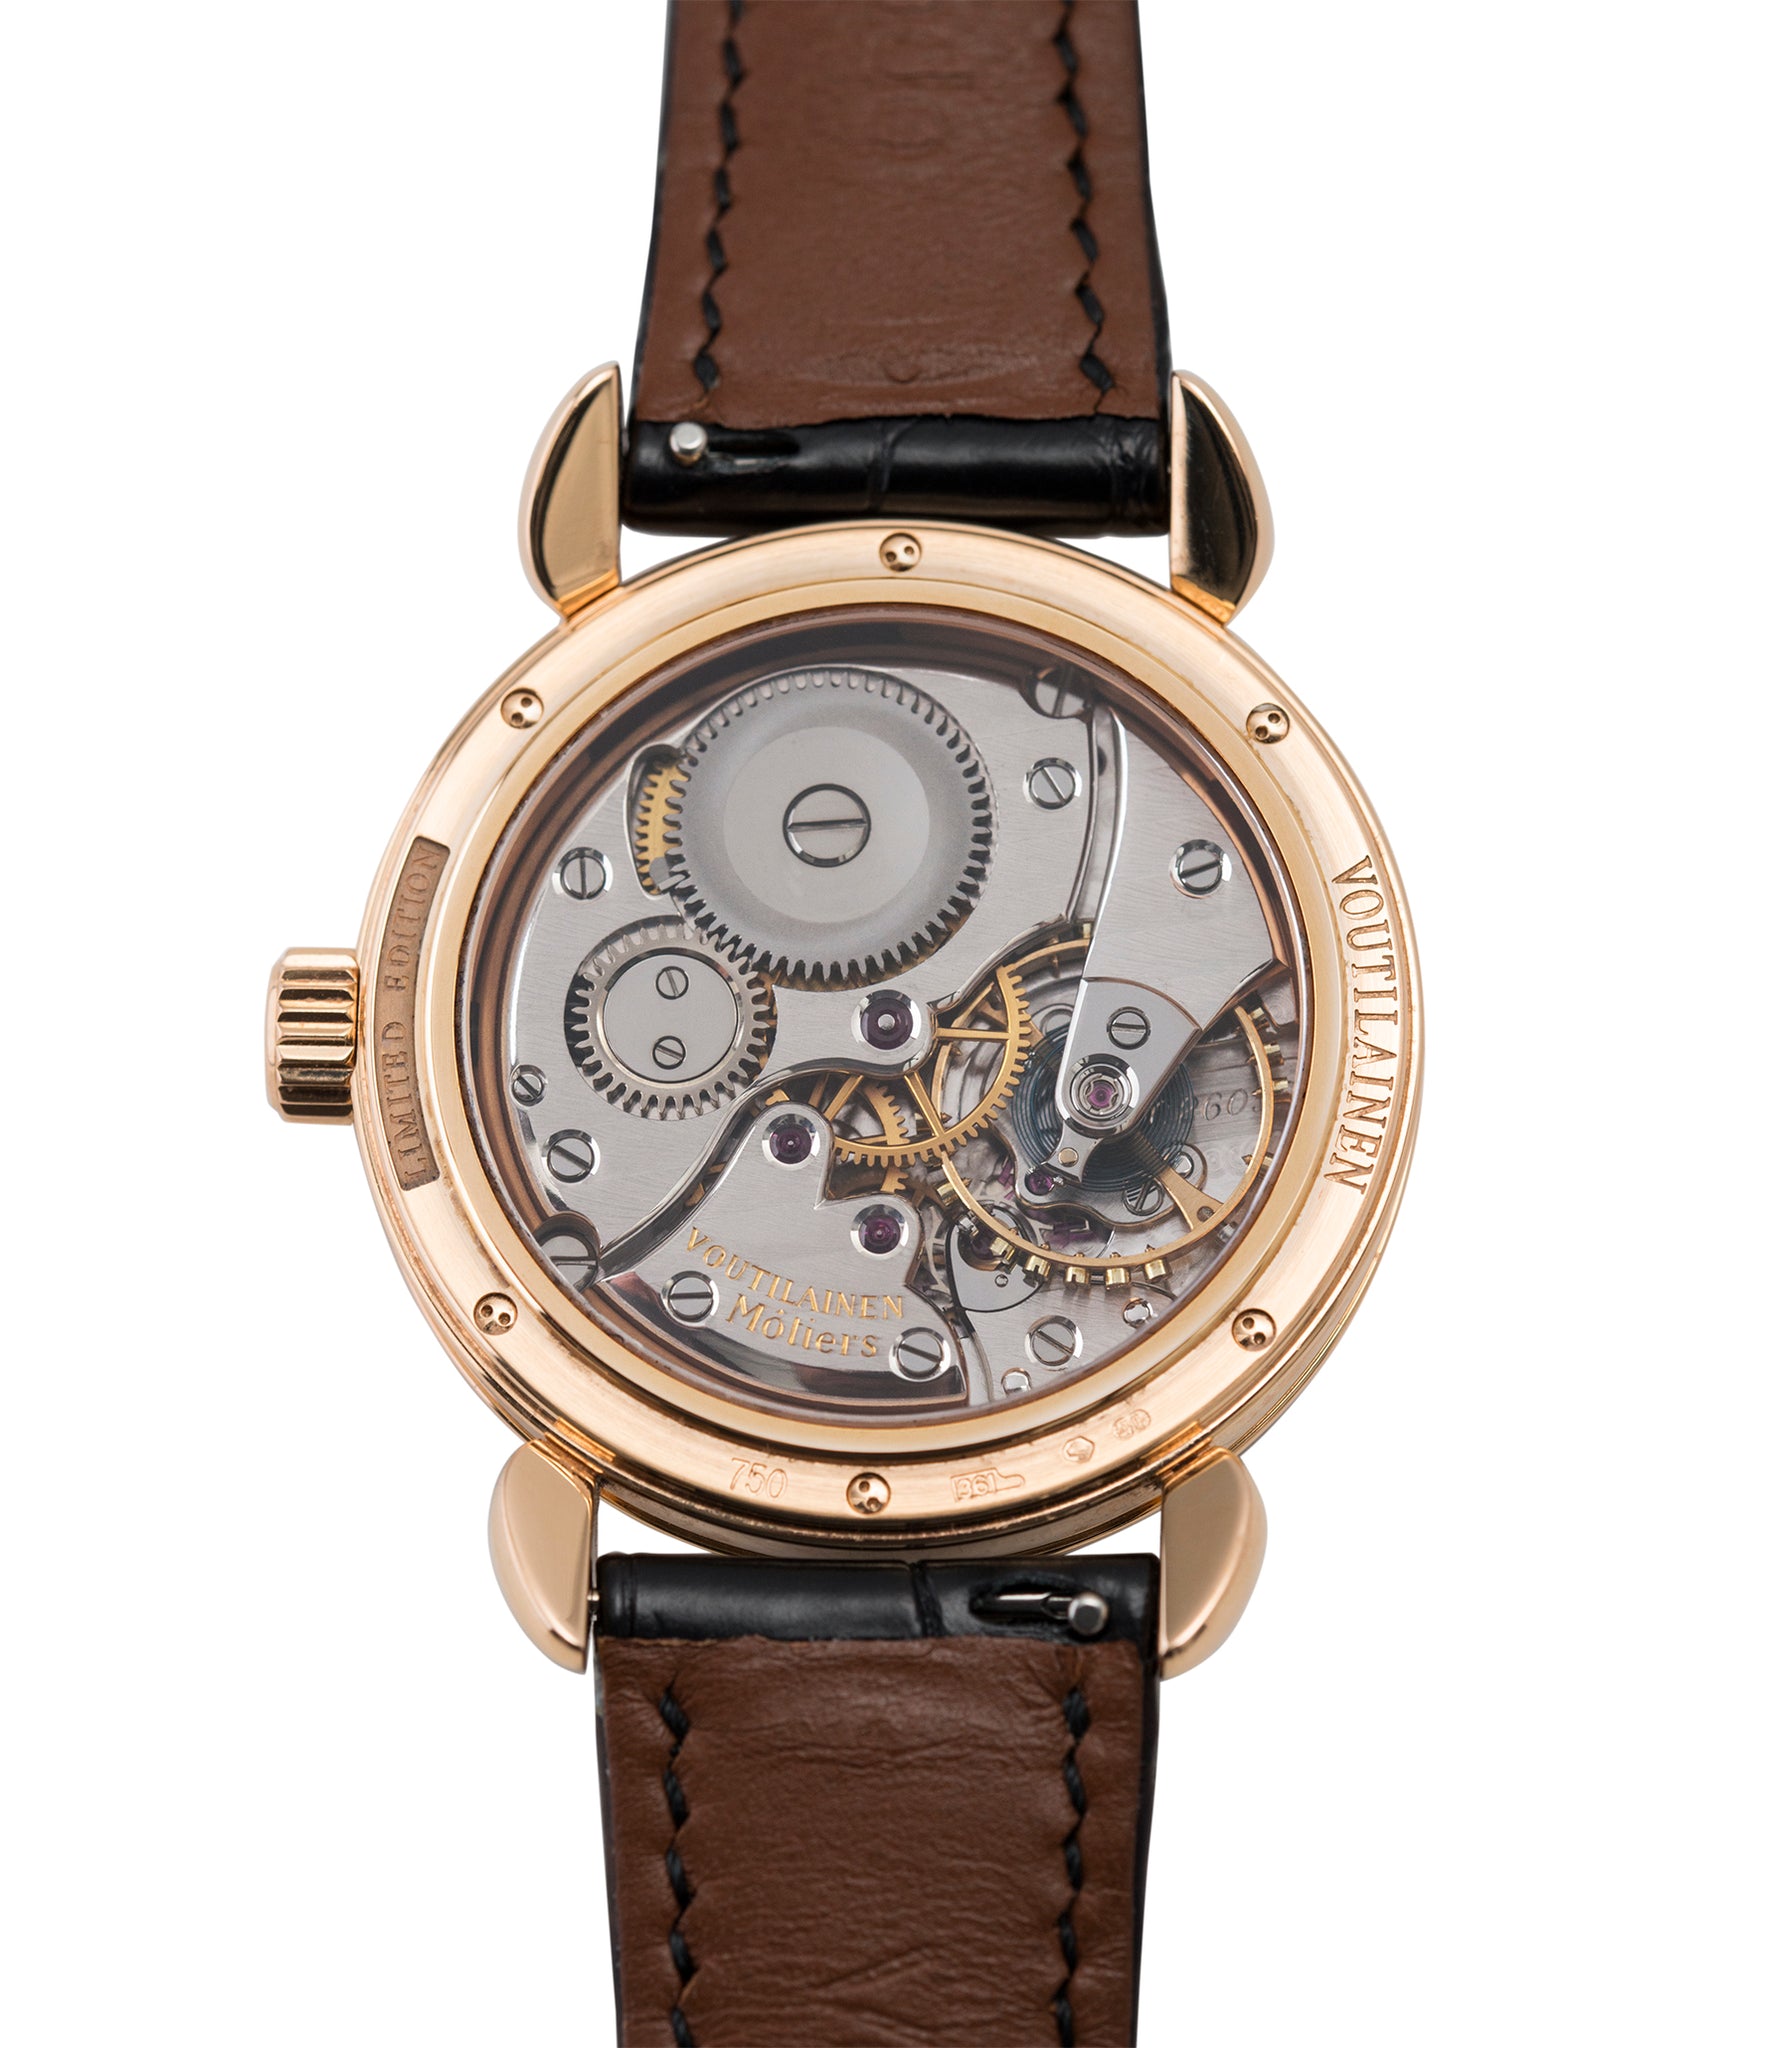 hand-made manual-winding Kari Voutilainen Observatoire Limited Edition rose gold rare dress watch for sale online at A Collected Man London endorsed seller of independent watchmaker